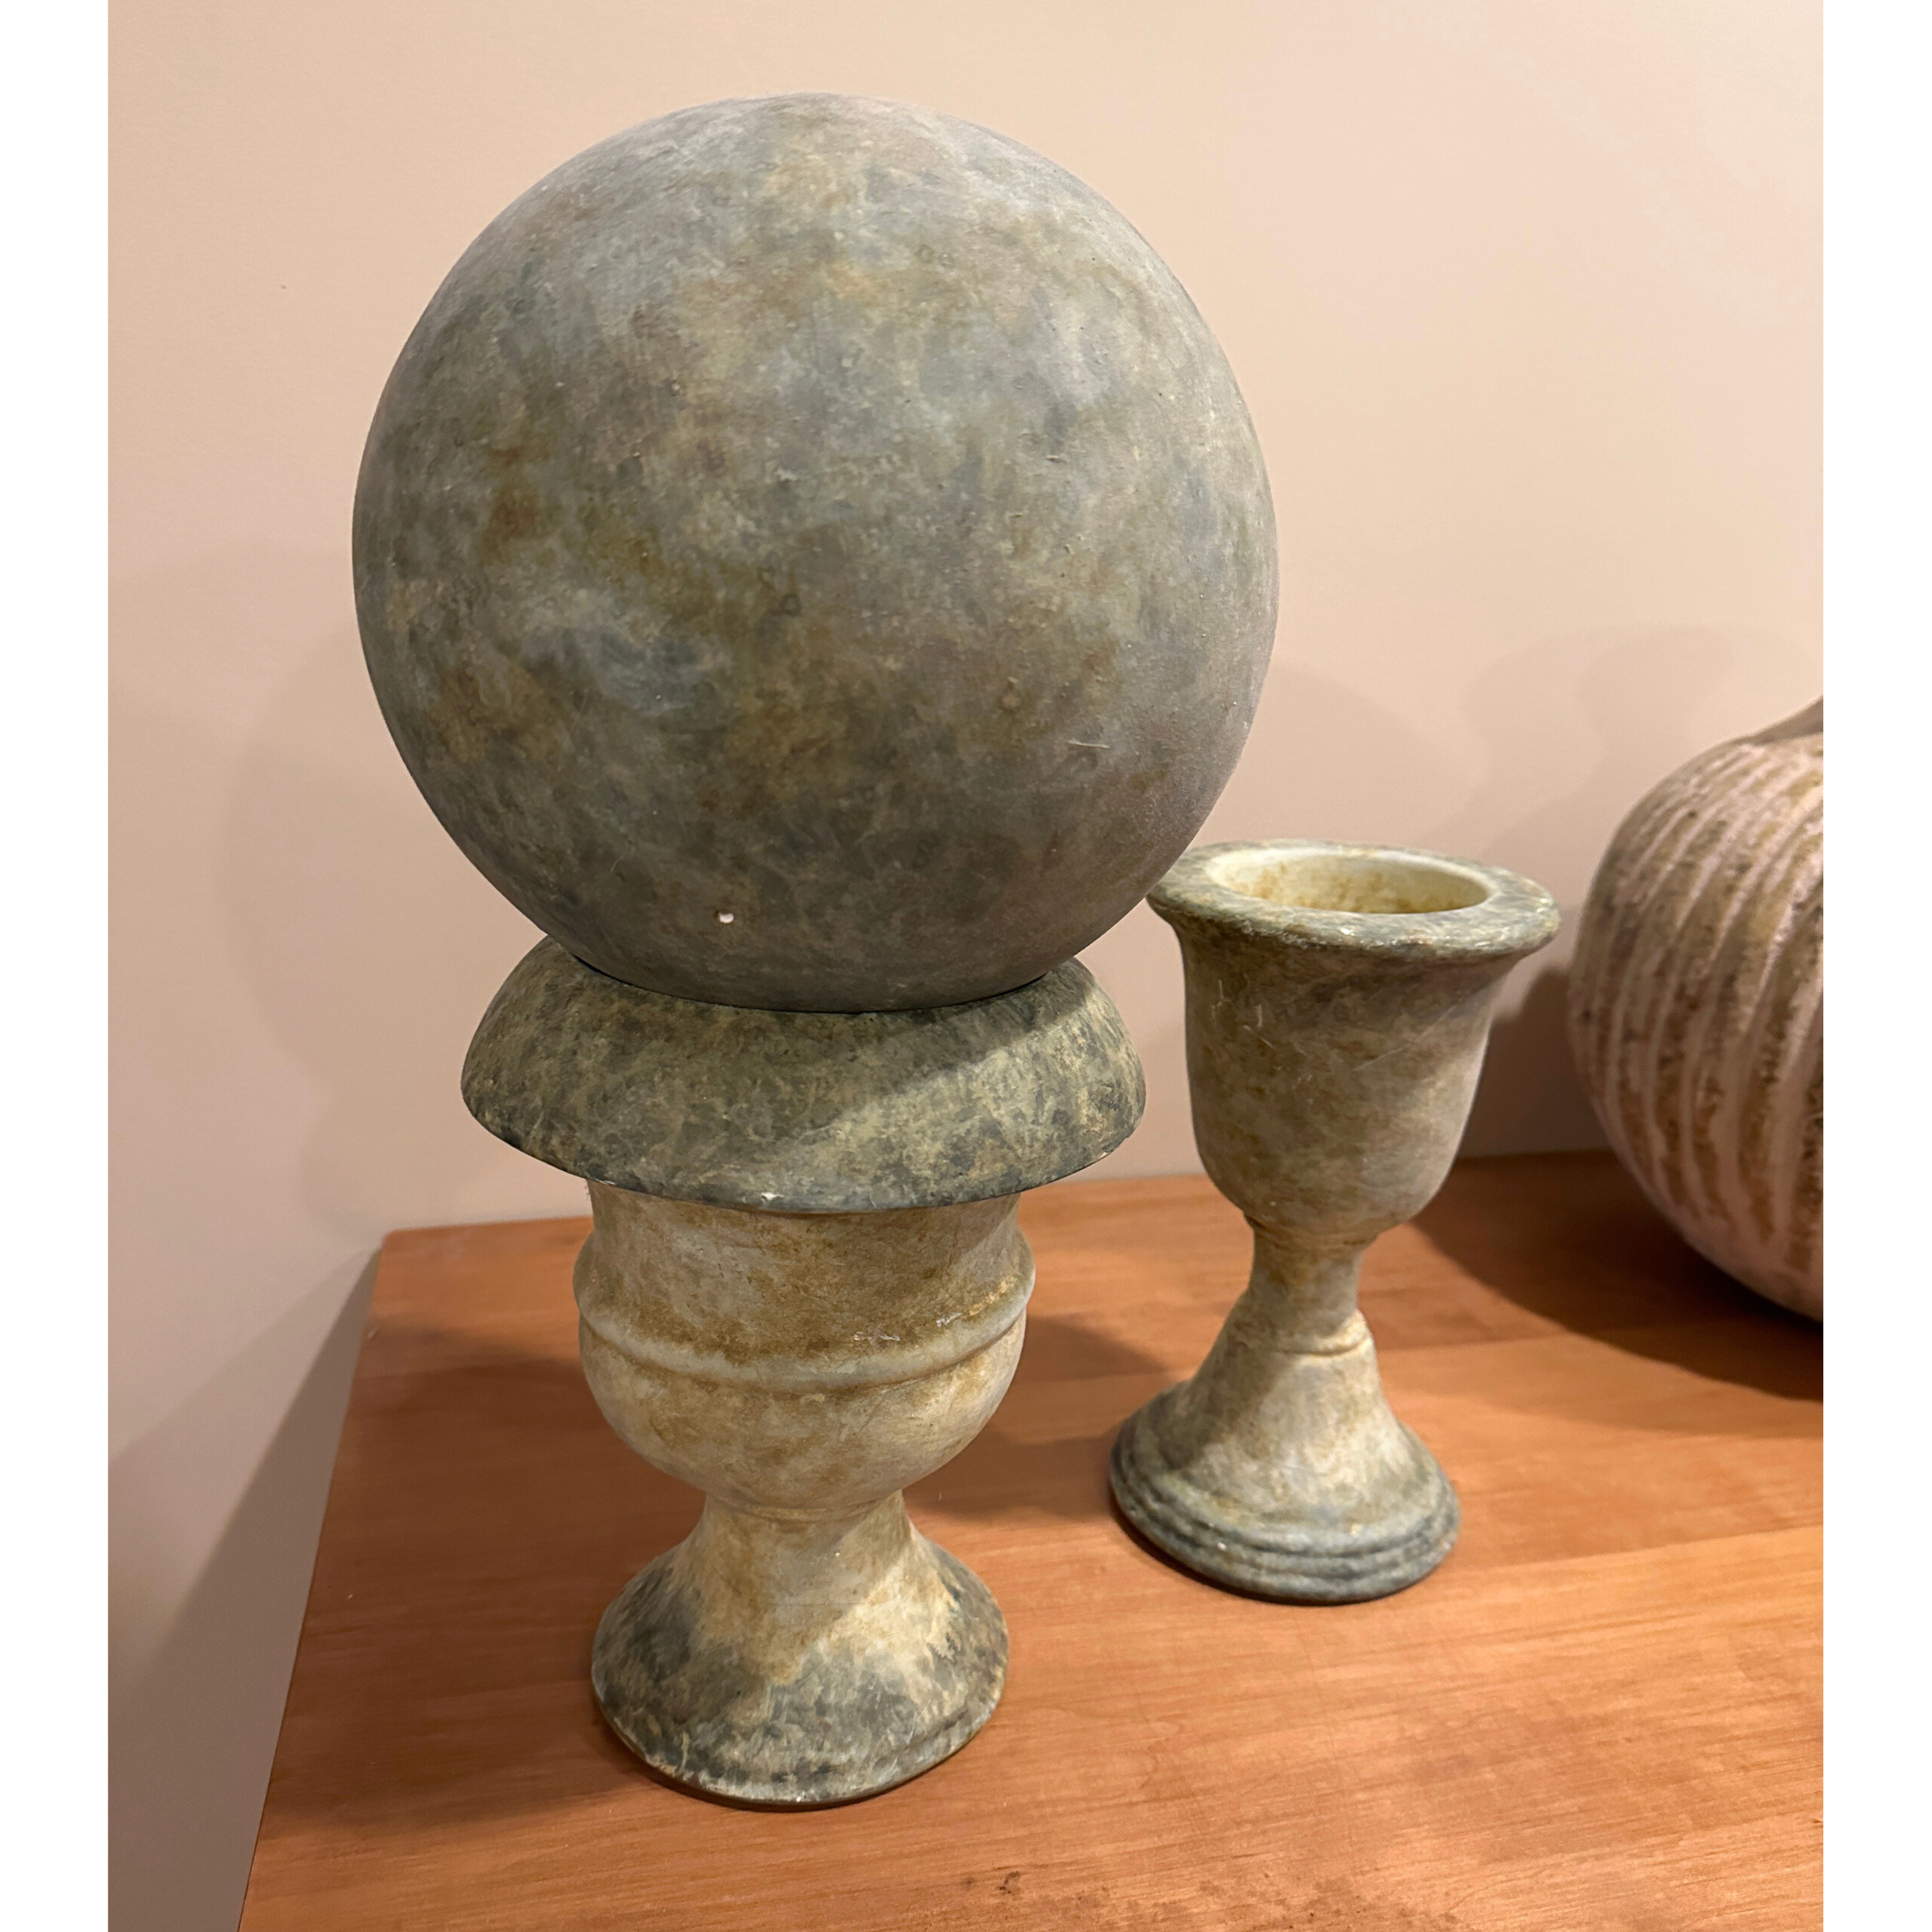 Pair of Urns with a Sphere Garden Statues